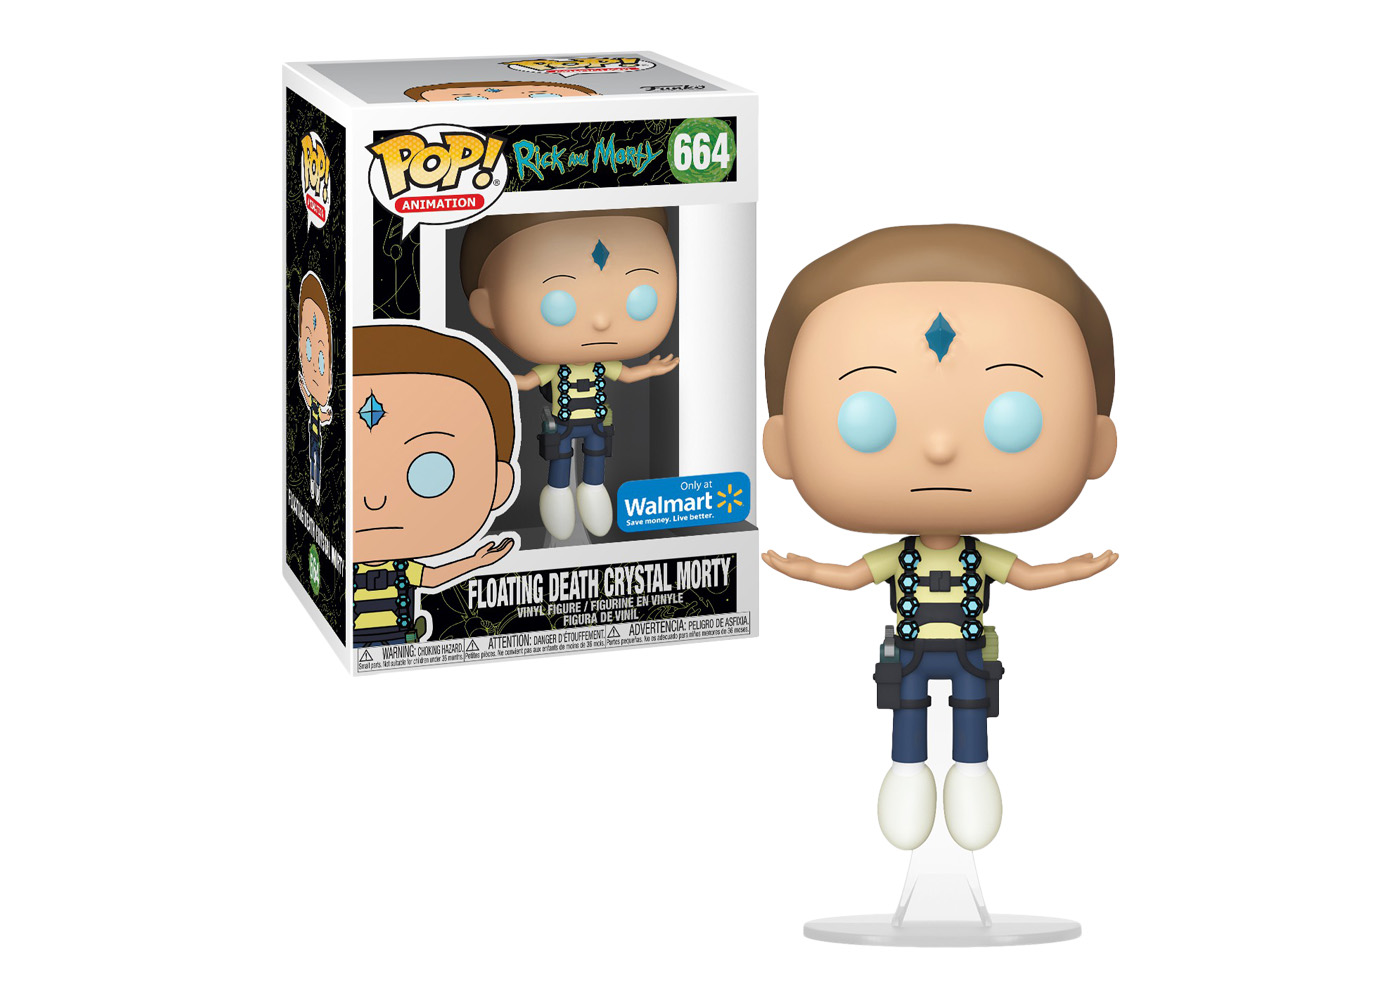 Funko Pop! Animation Rick & Morty Floating Death Crystal Morty